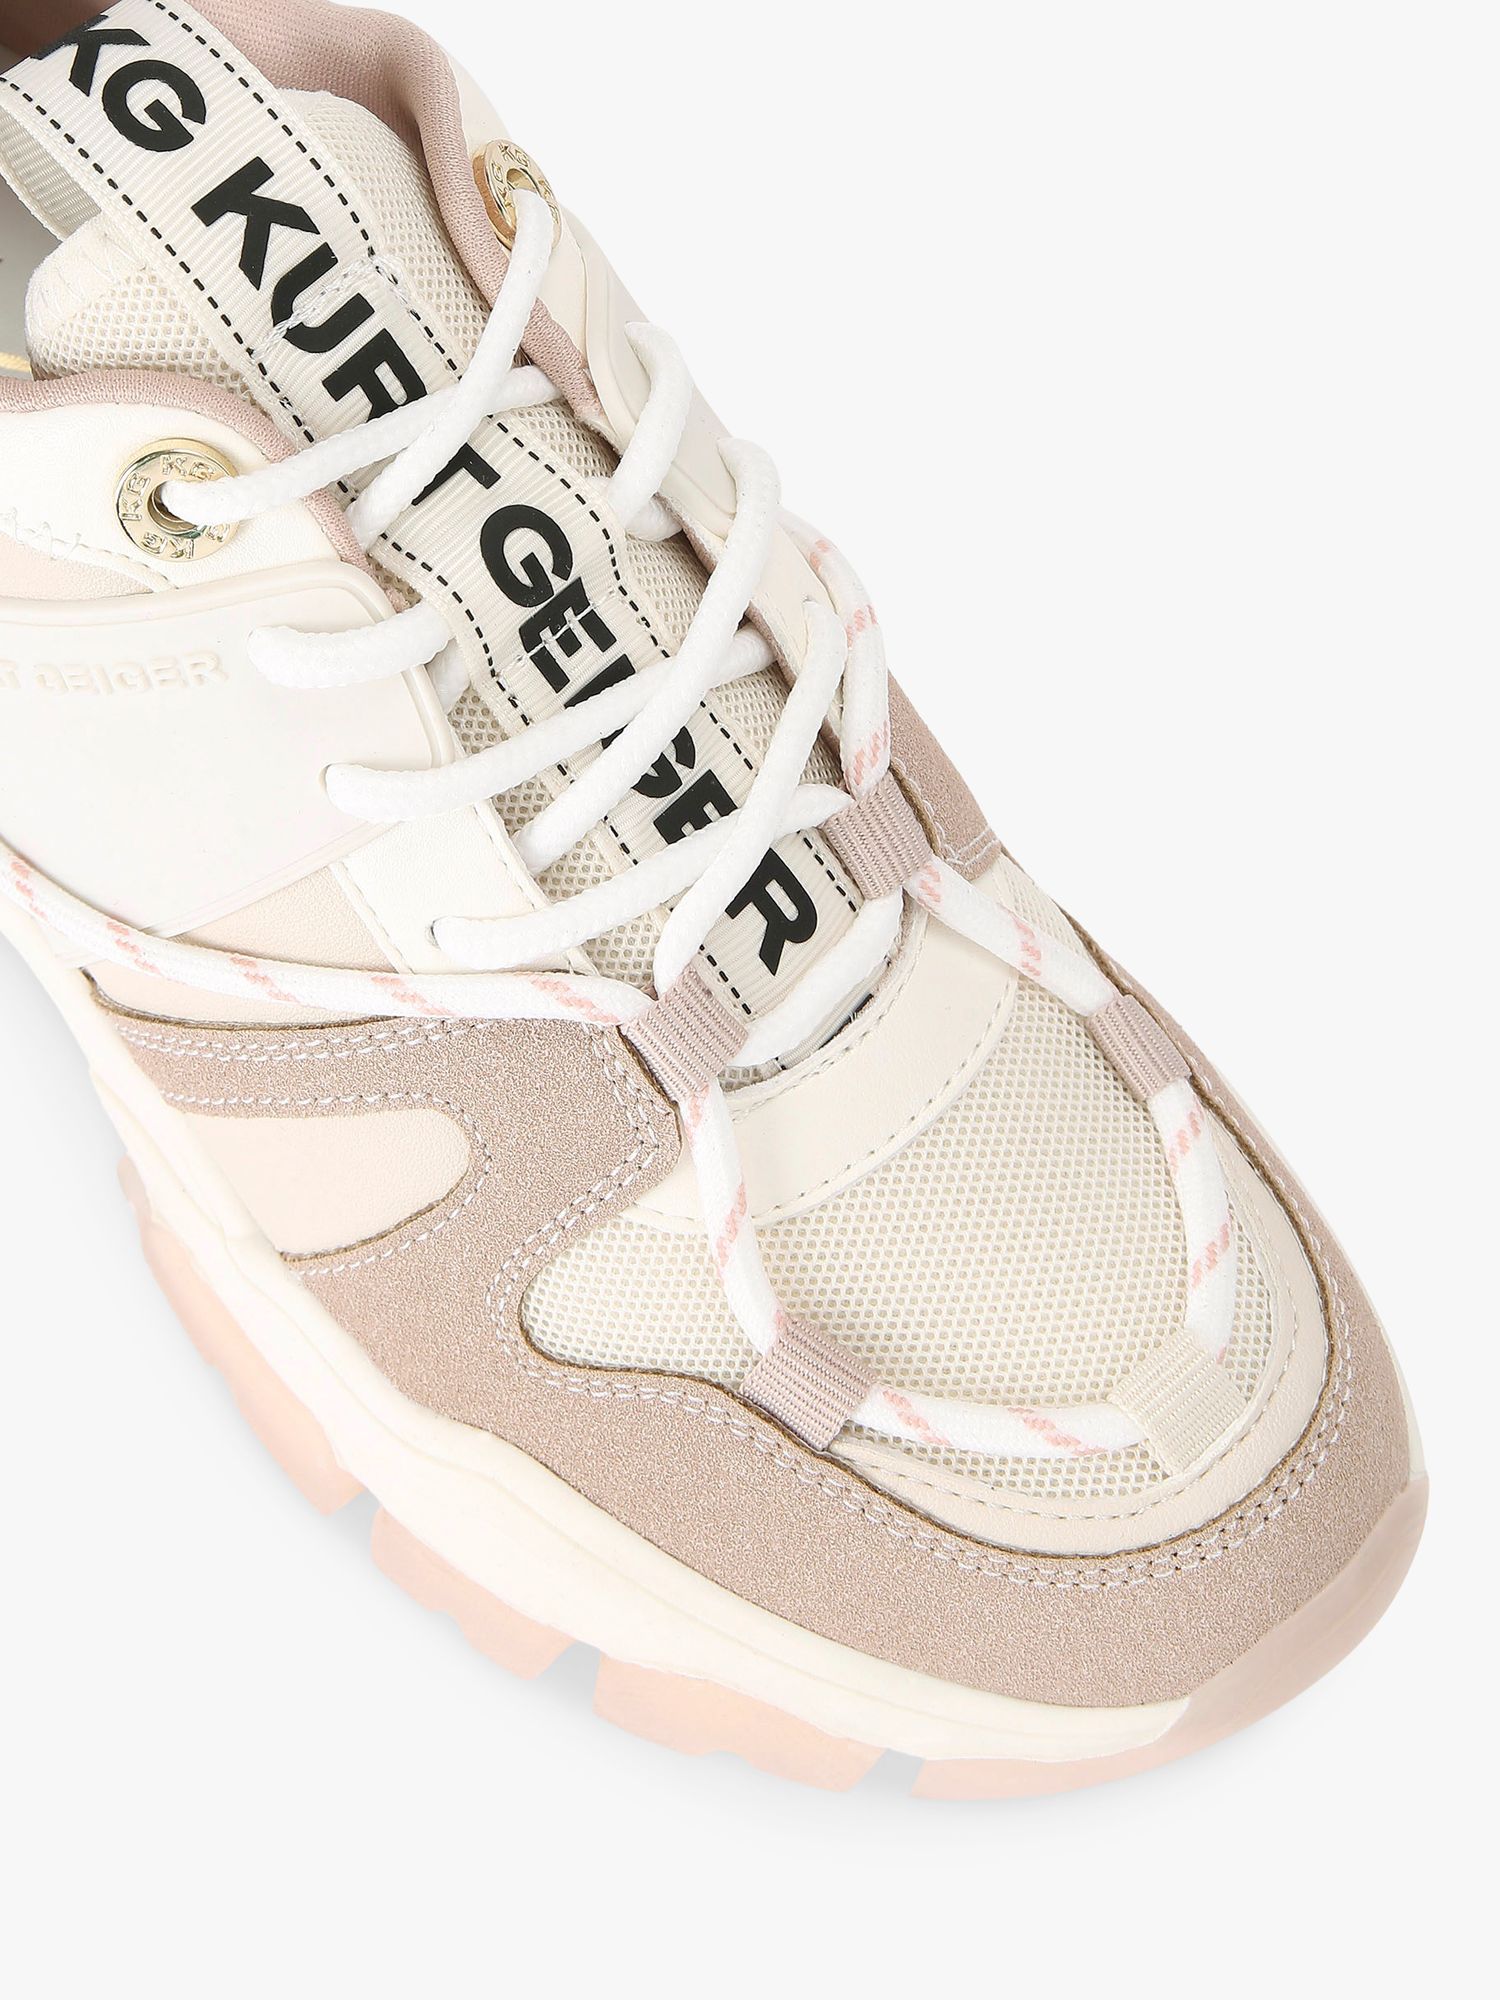 Buy KG Kurt Geiger Limitless 3 Chunky Sole Trainers, Pink/Multi Online at johnlewis.com